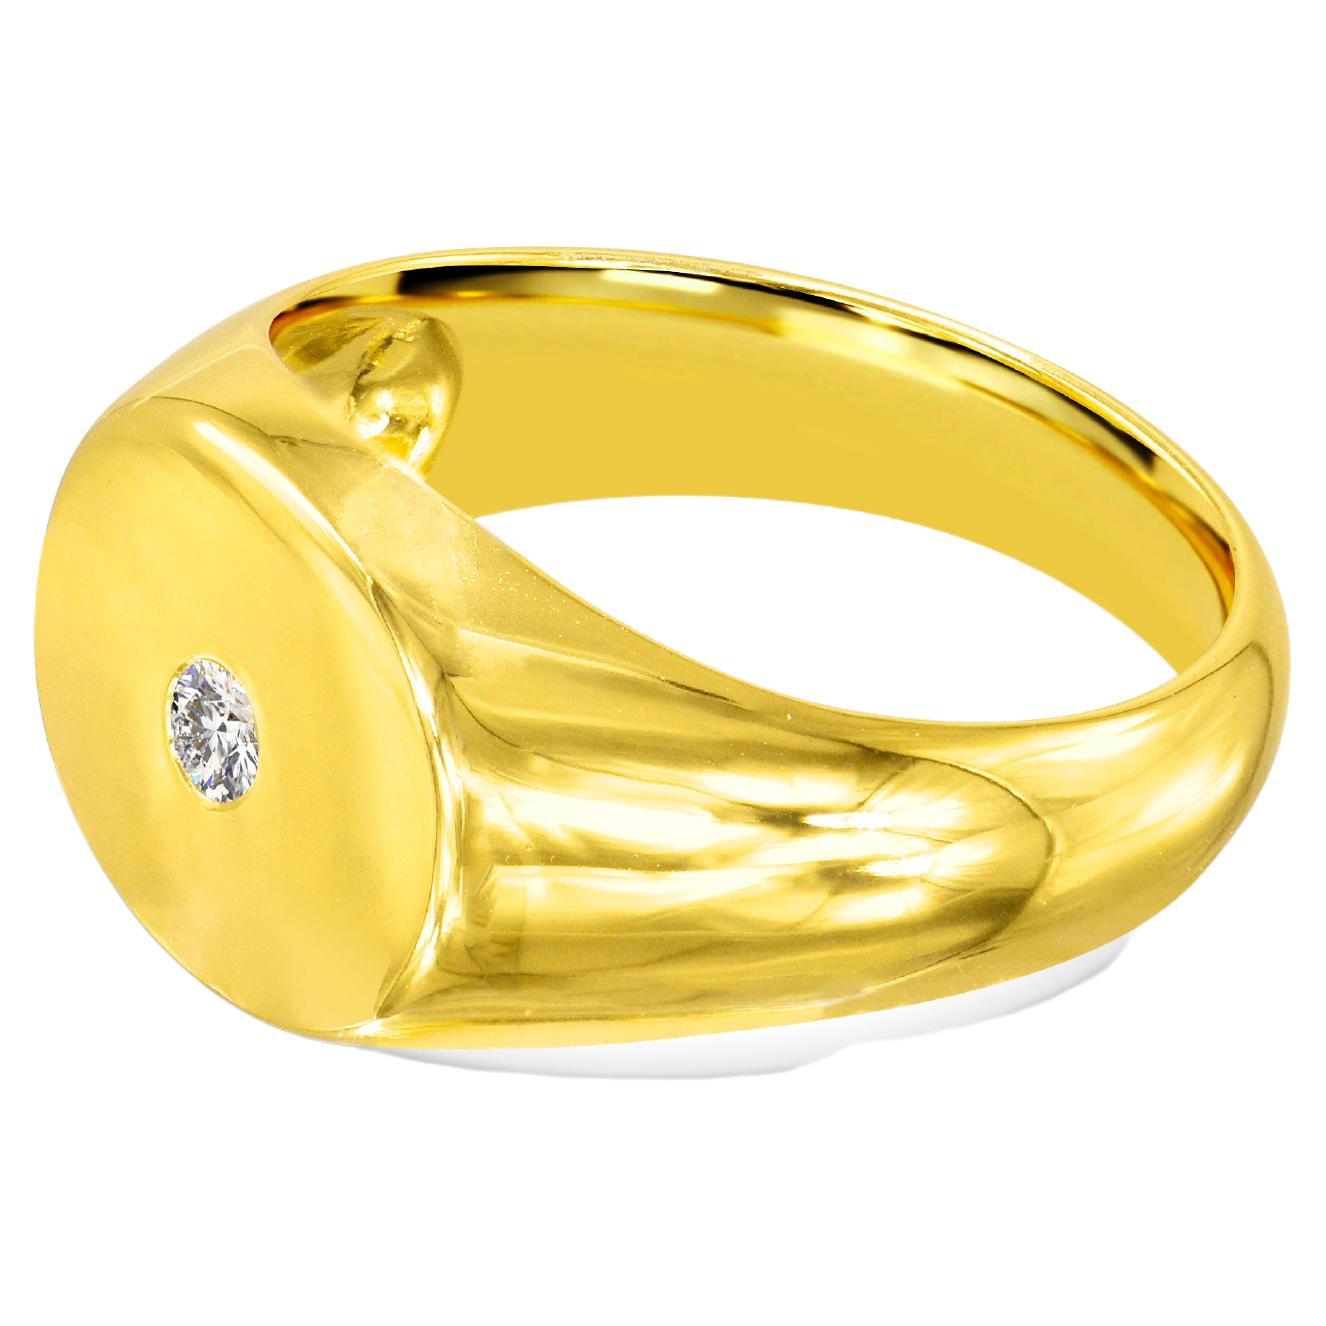 For Sale:  18K Gold filled Signet ring with 0.06 Carat Natural Diamond